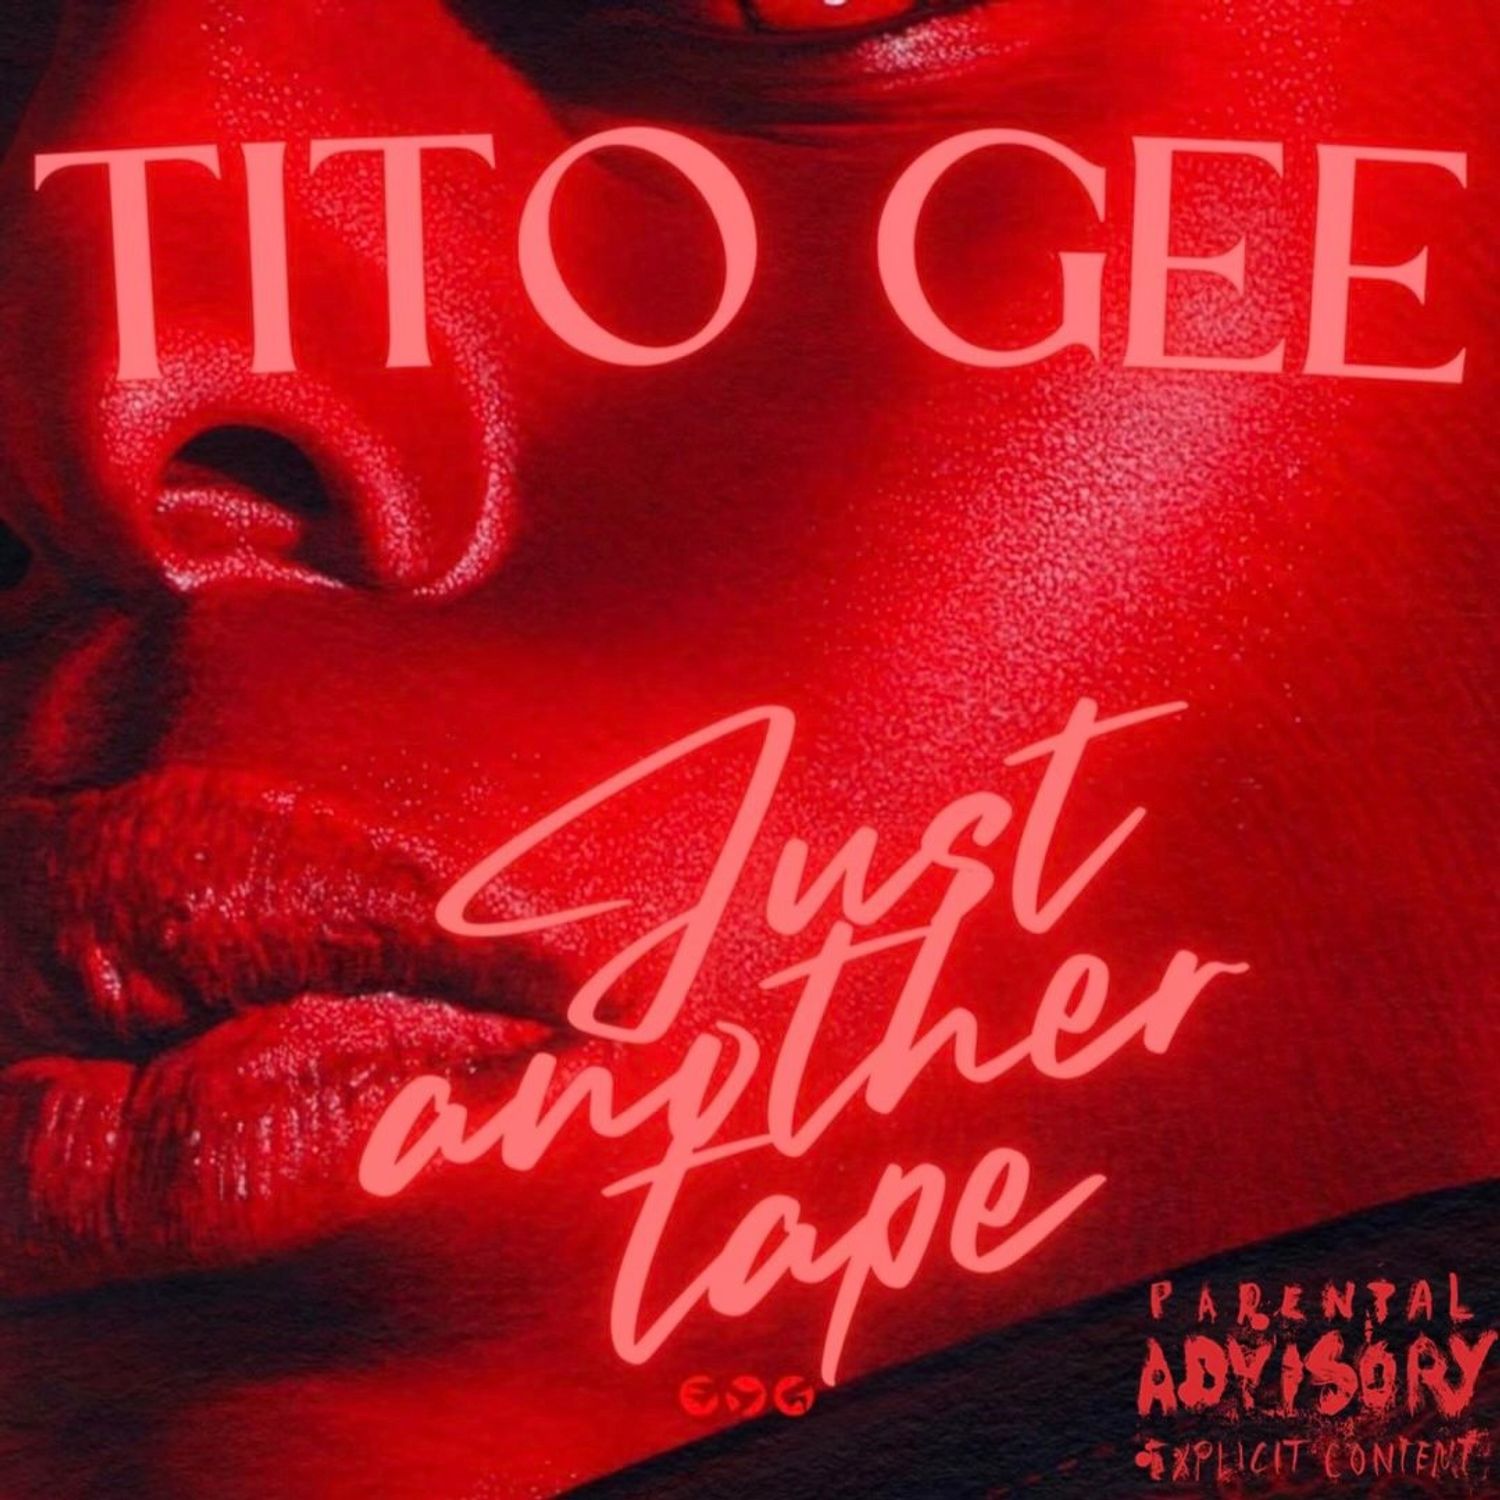 Just Another Tape - Tito Gee